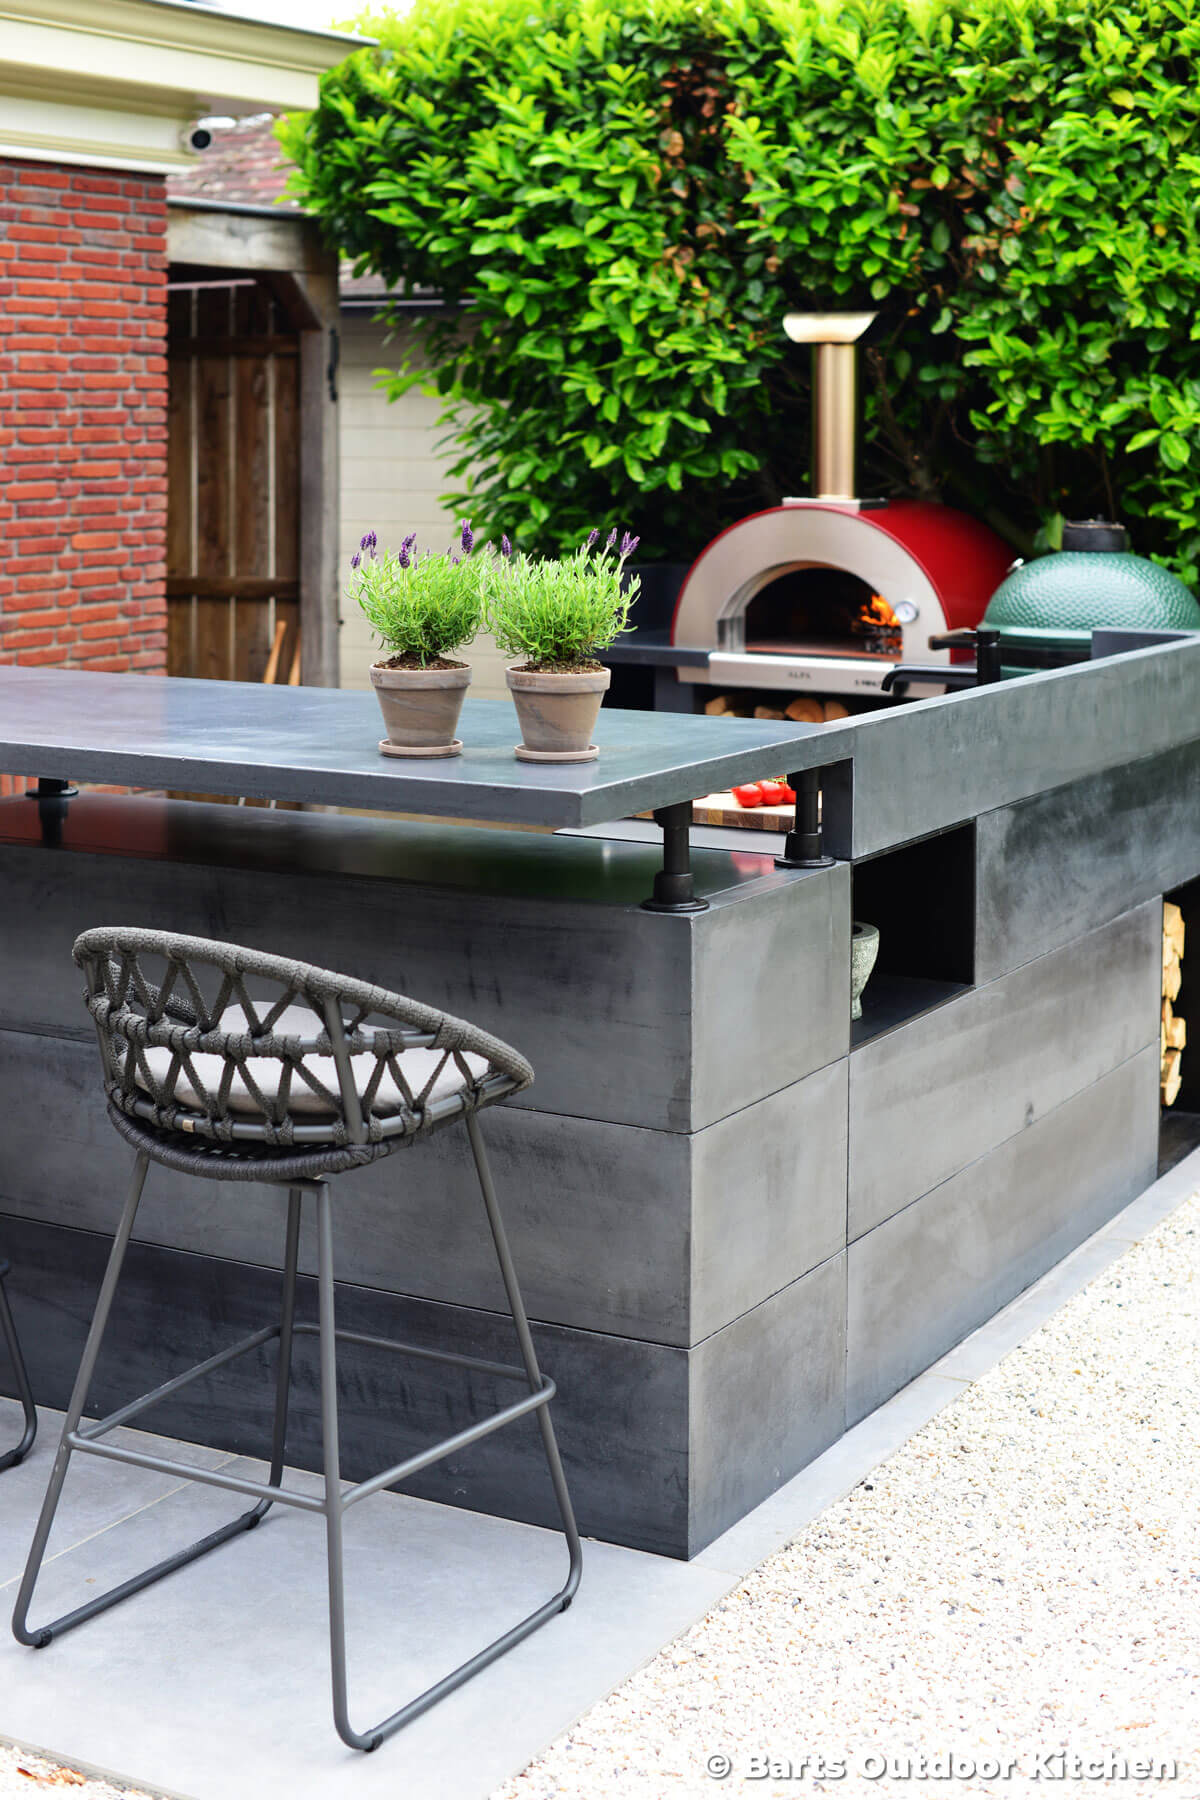 Four tips for designing the perfect outdoor kitchen | Alfa Forni